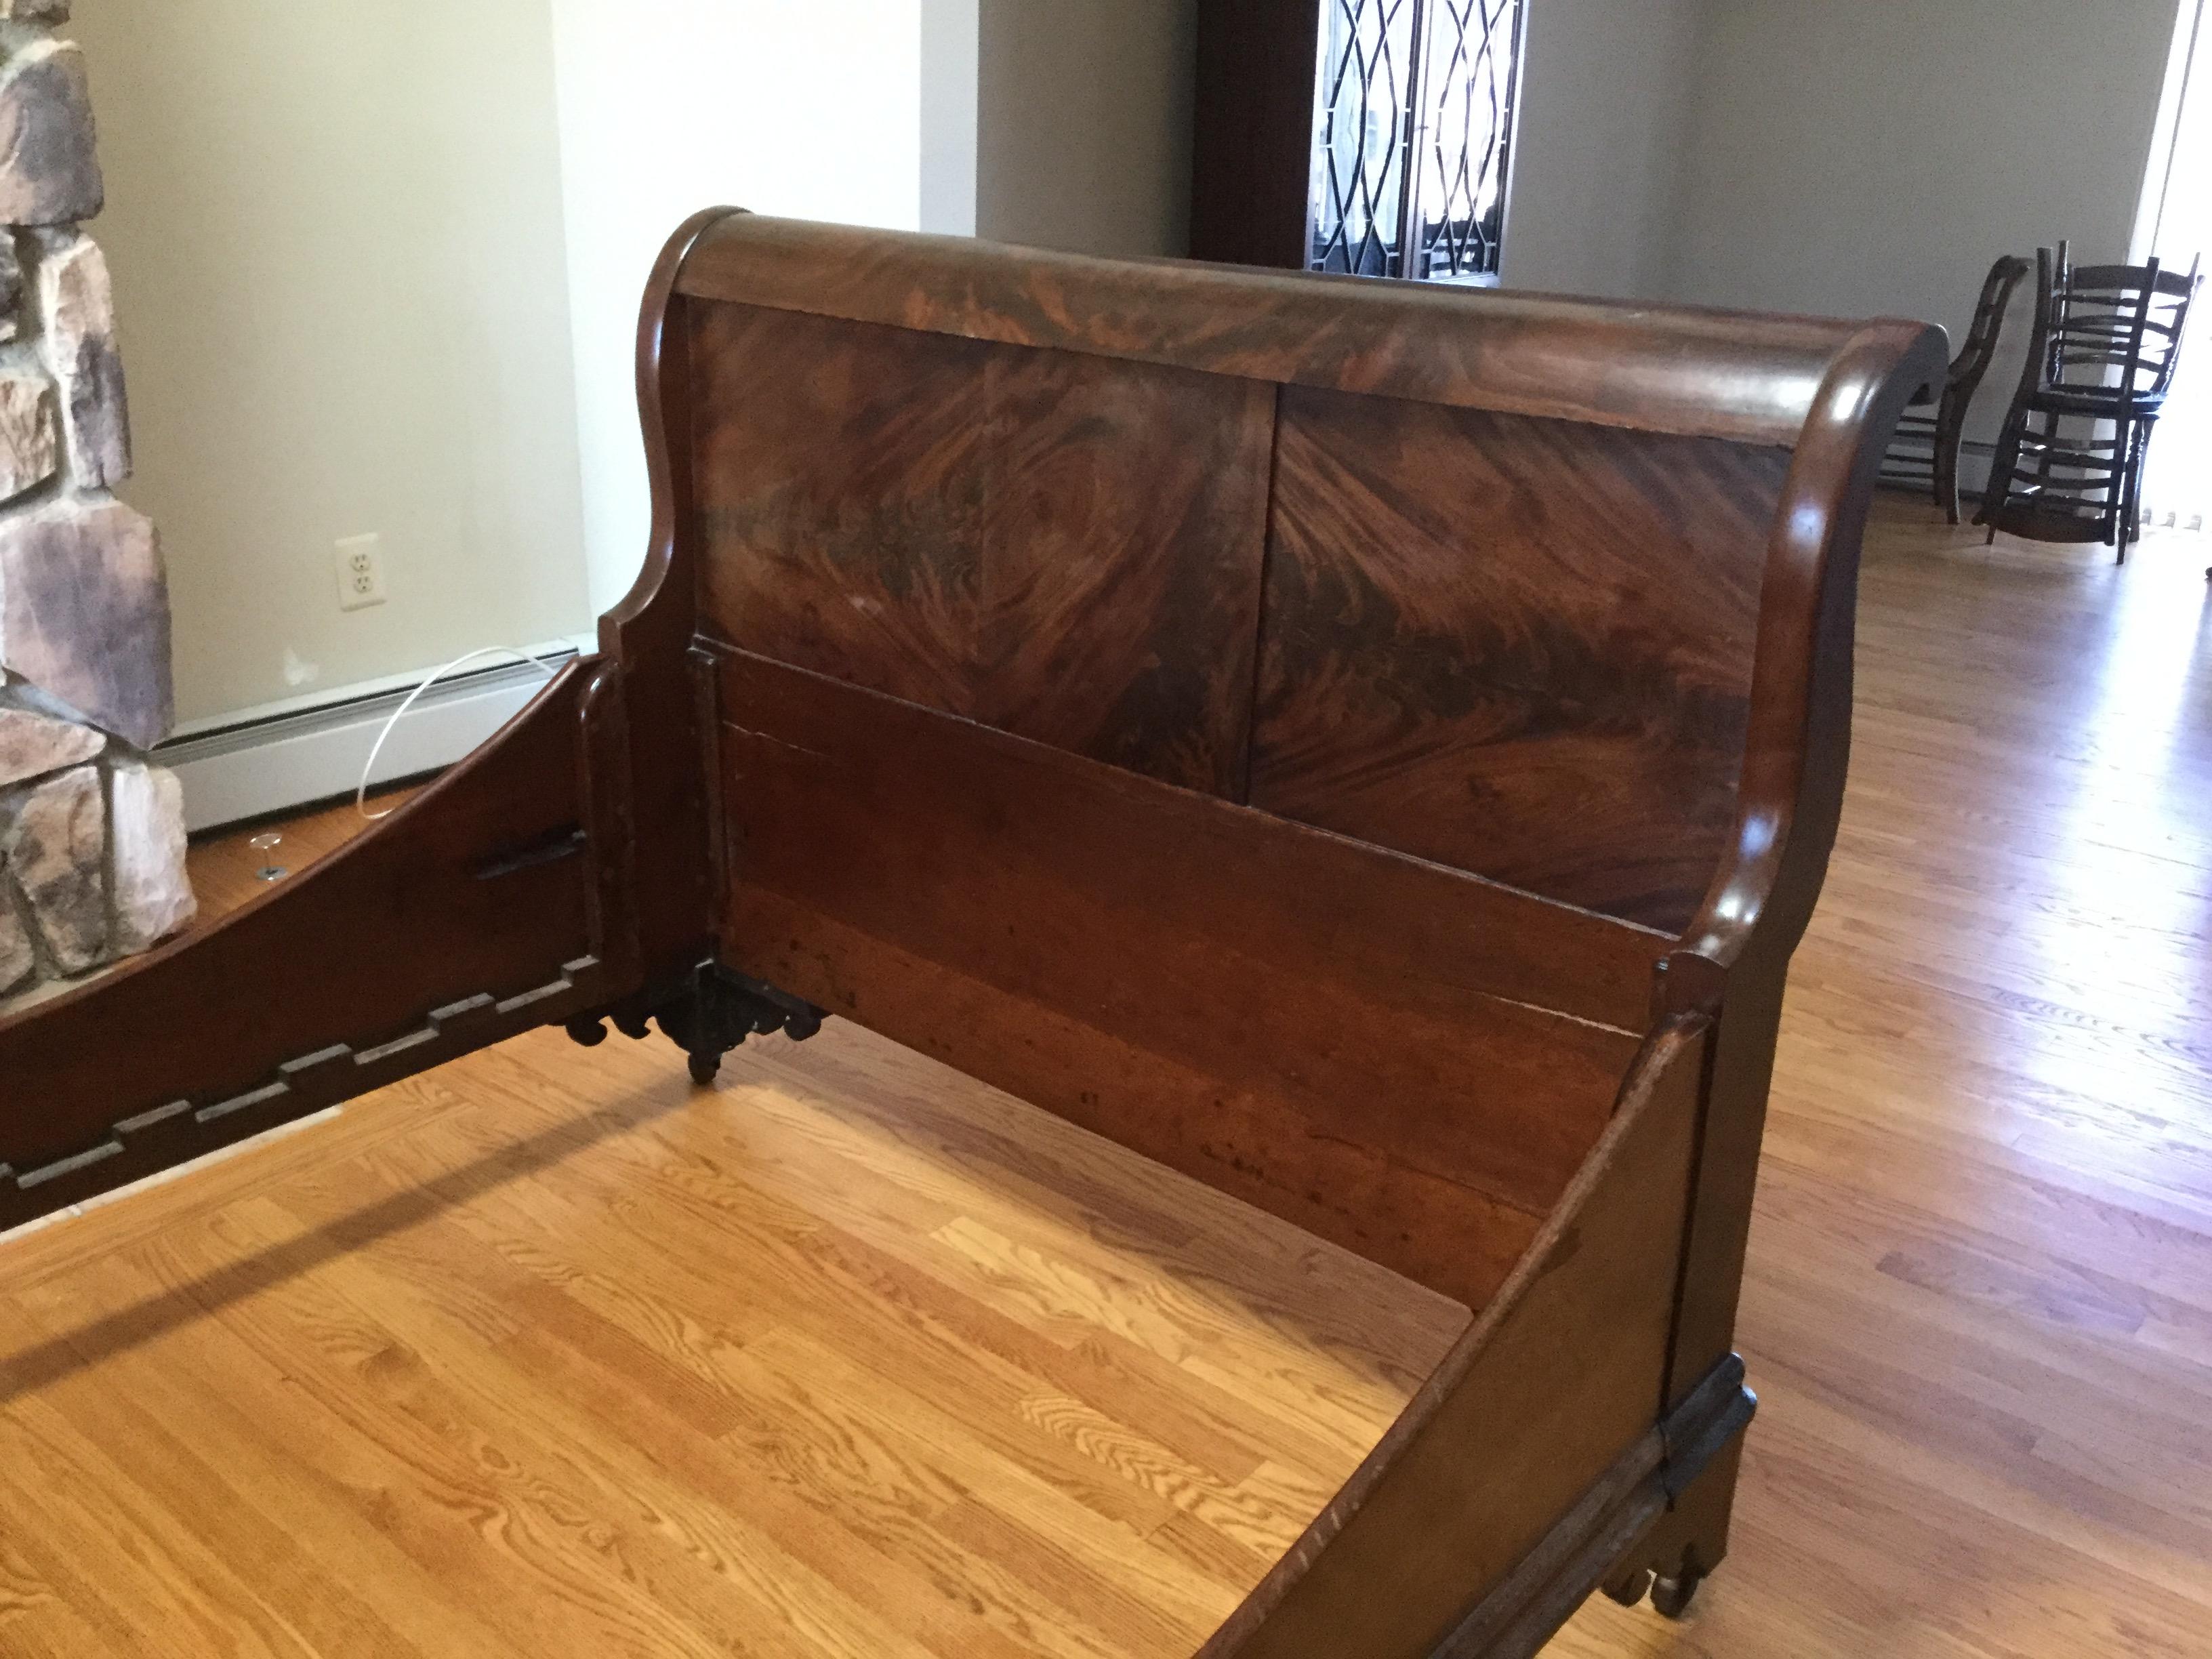 Handsome and elegant describe this early 20th century English/Scottish sleigh bed. Made of flame-mahogany, this bed will accommodate a full mattress. The head and footboard are of the same height and the side rails are both finished and very